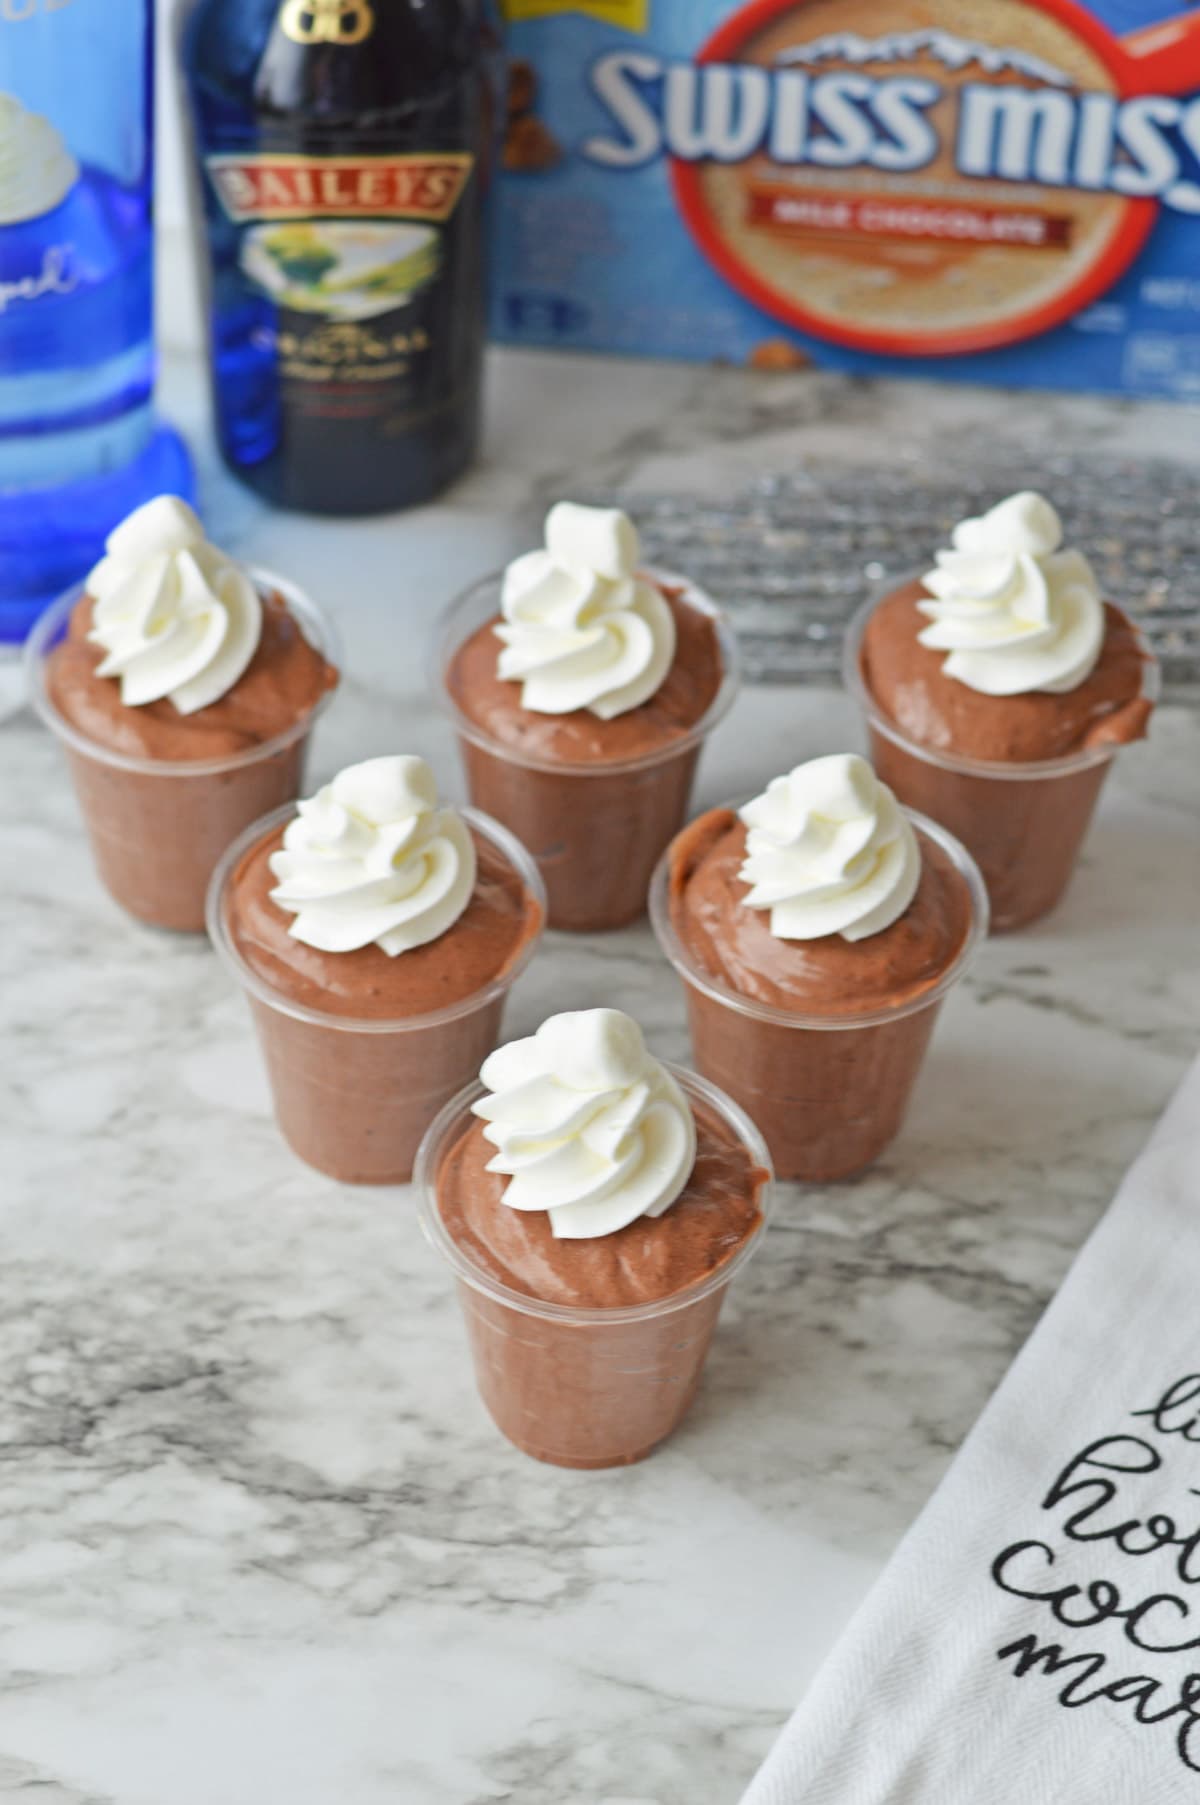 Chocolate pudding shots with ingredients in background